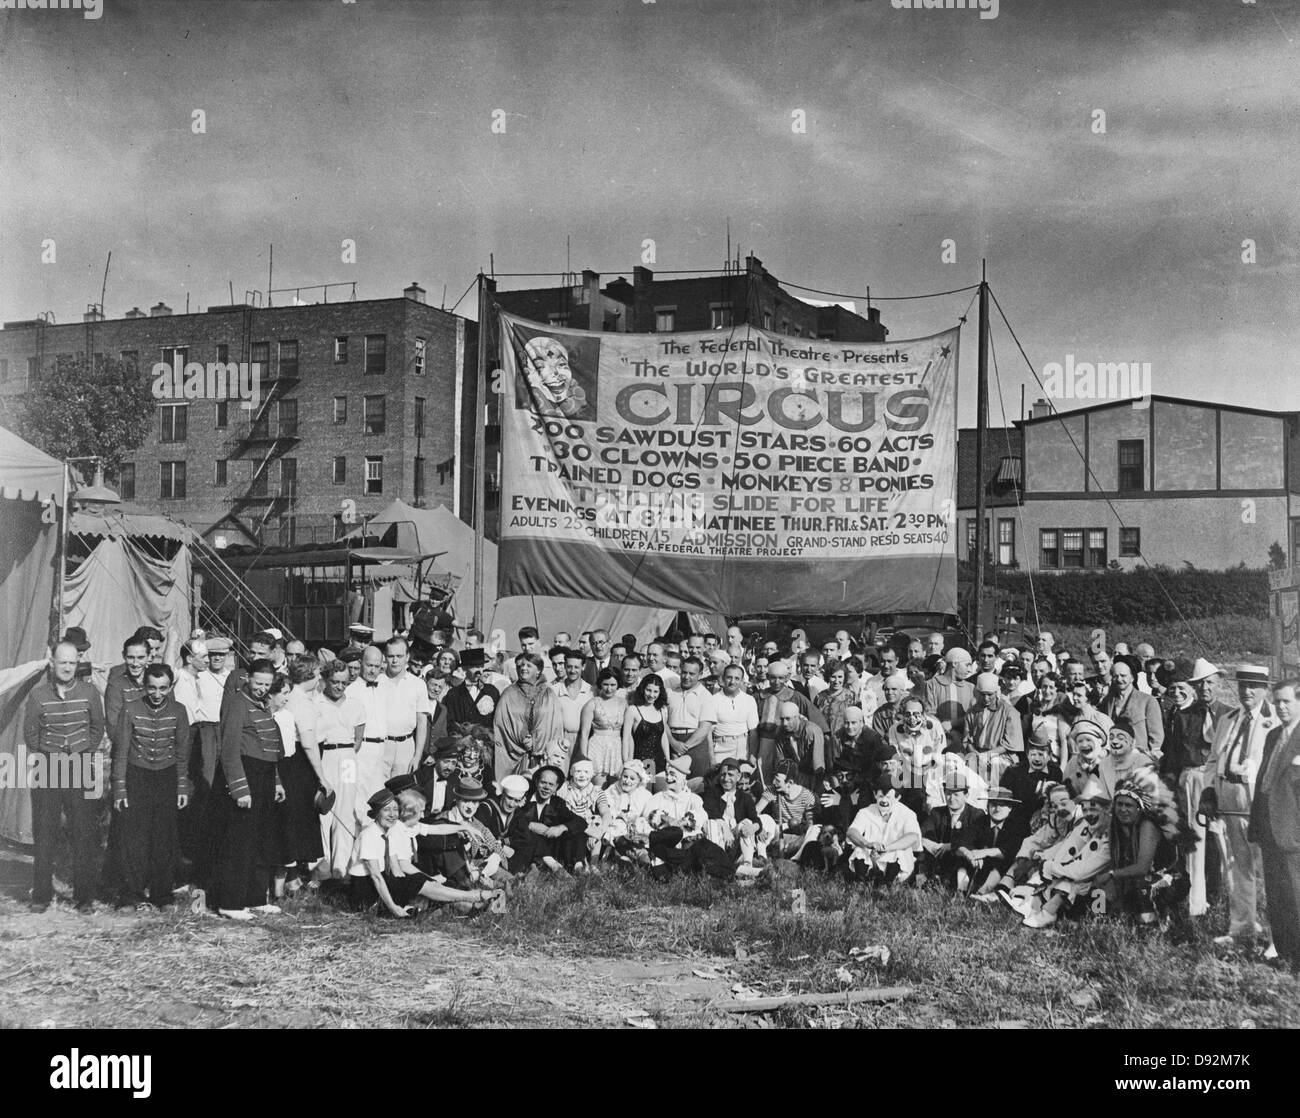 The Federal Theatre presents the world's greatest! circus : 200 sawdust stars, 60 acts, 30 clowns, 50 piece band, trained dogs, monkeys & ponies, 'thrilling slide for life.', circa 1935 Stock Photo